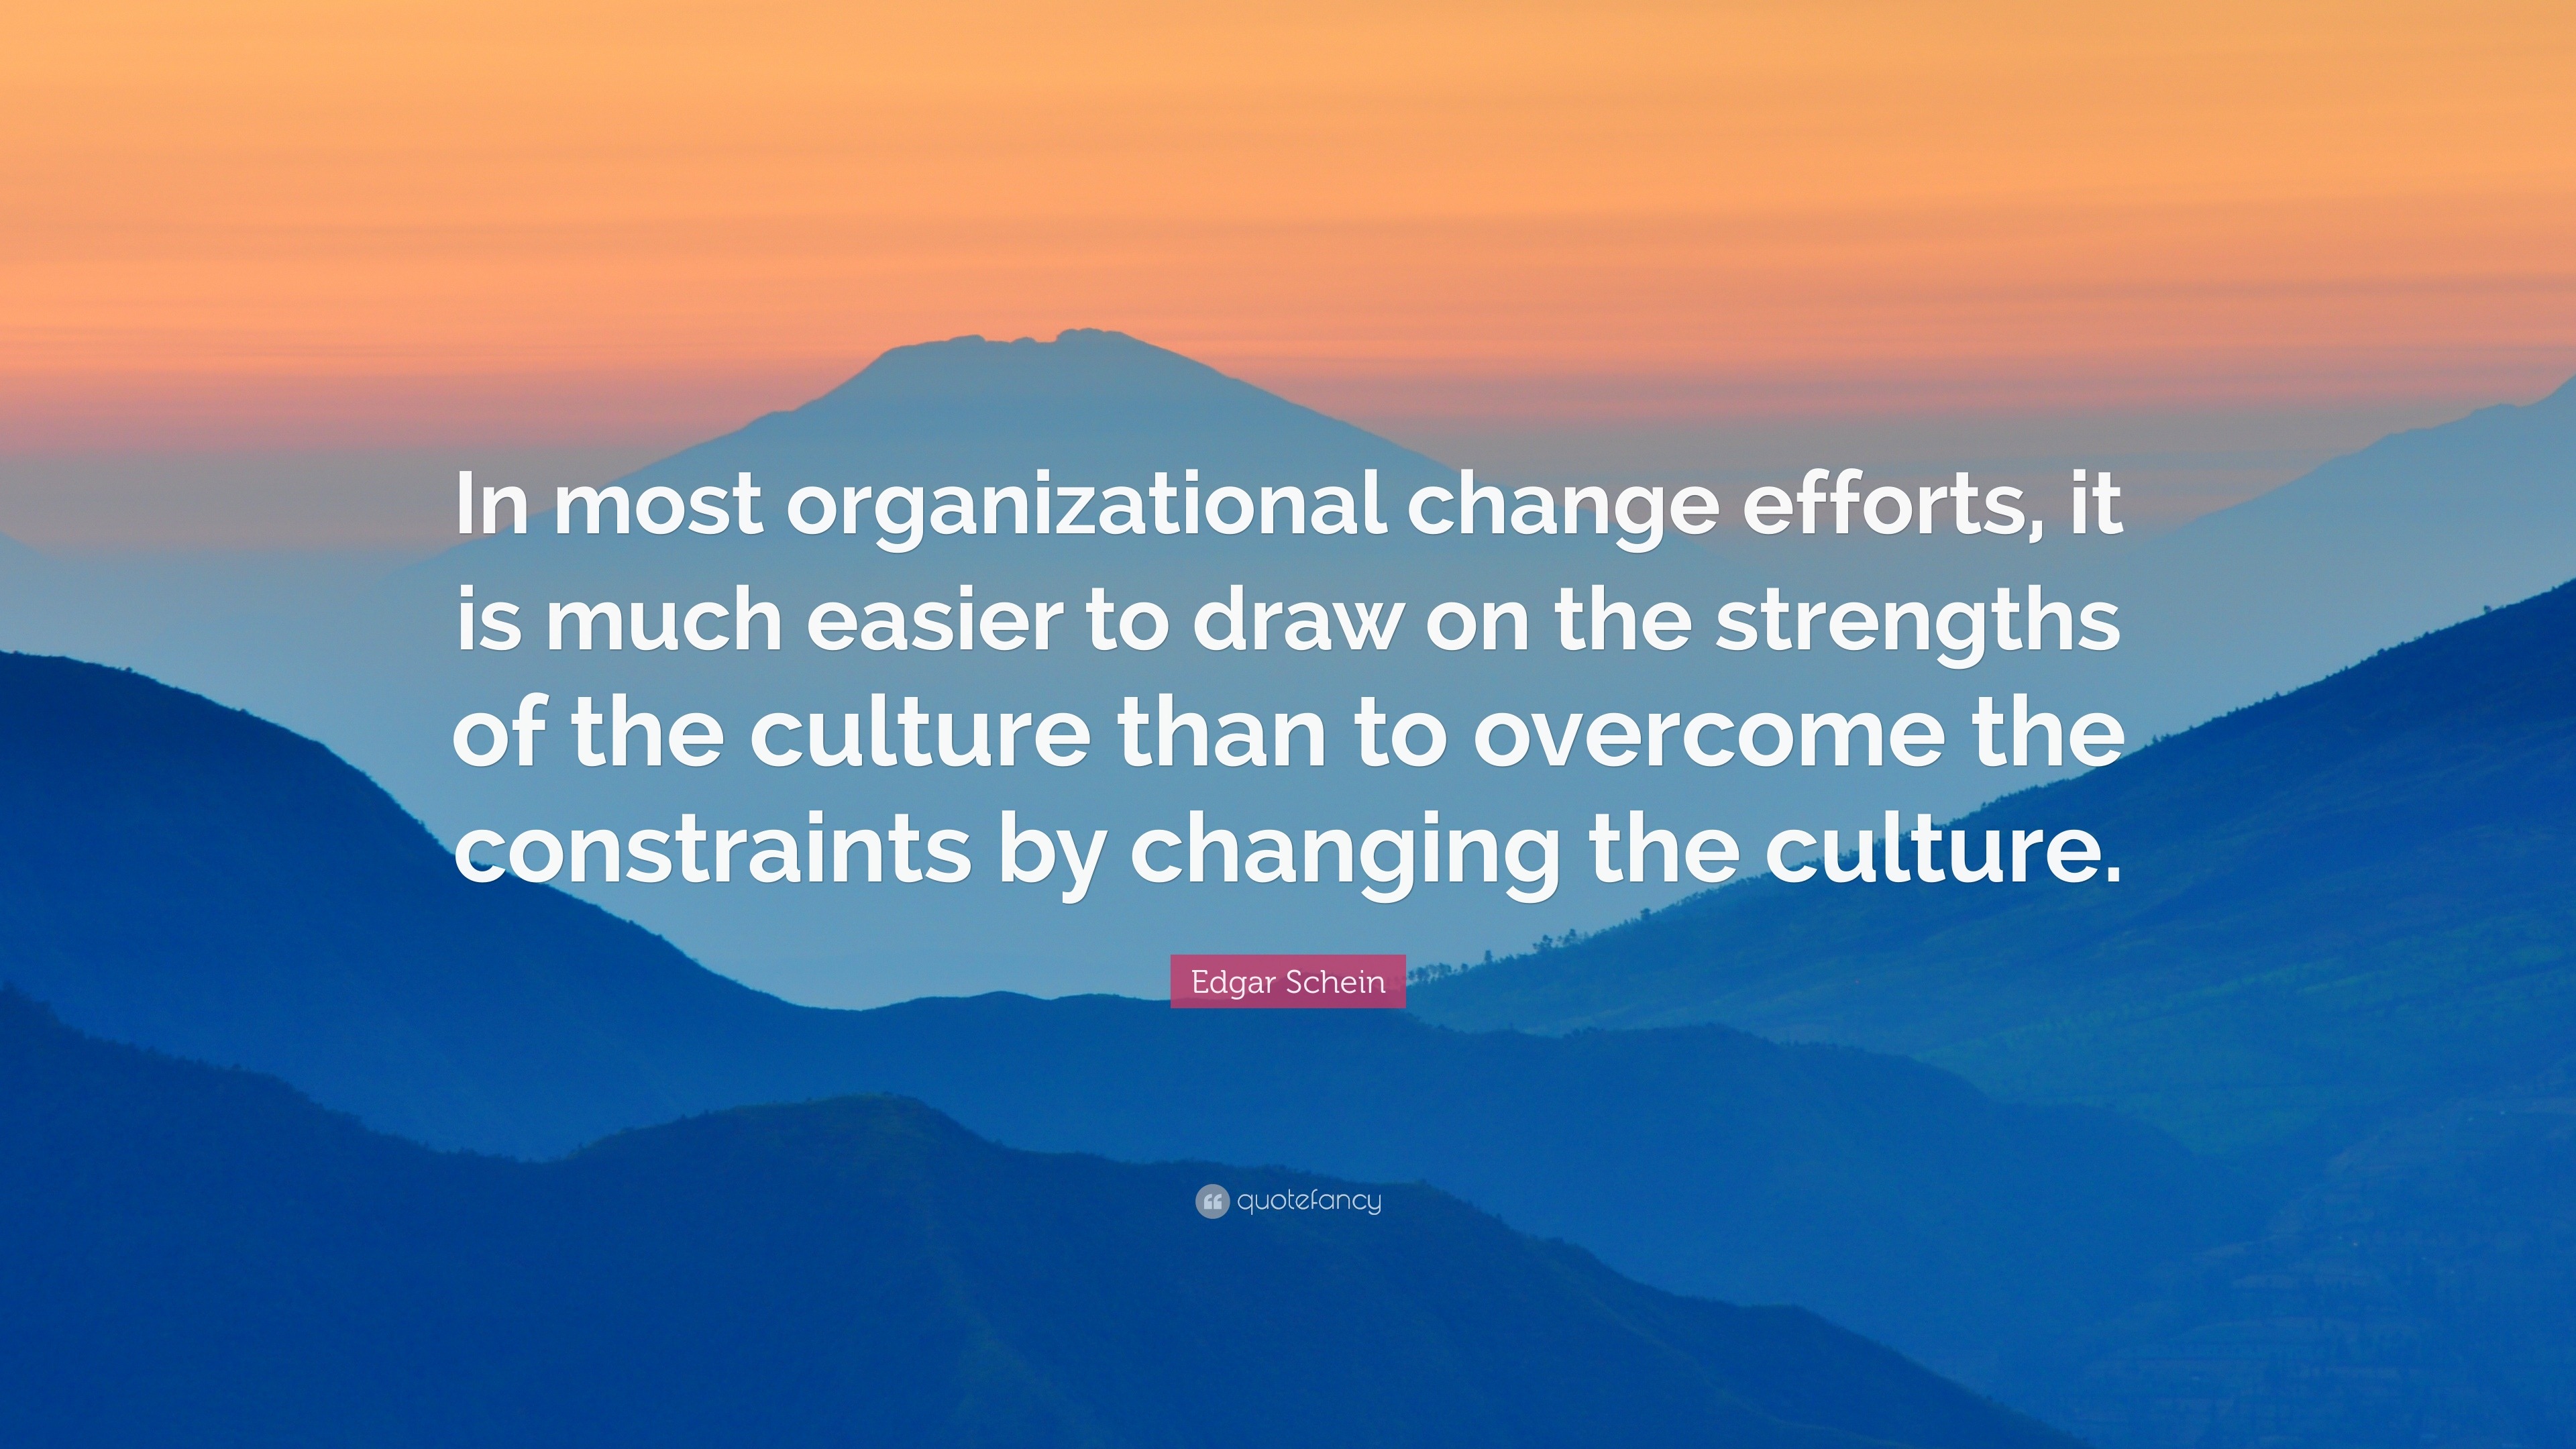 Change organizational problems schein quote man culture edgar they quotes wants efforts most made changing easier draw much human therefore